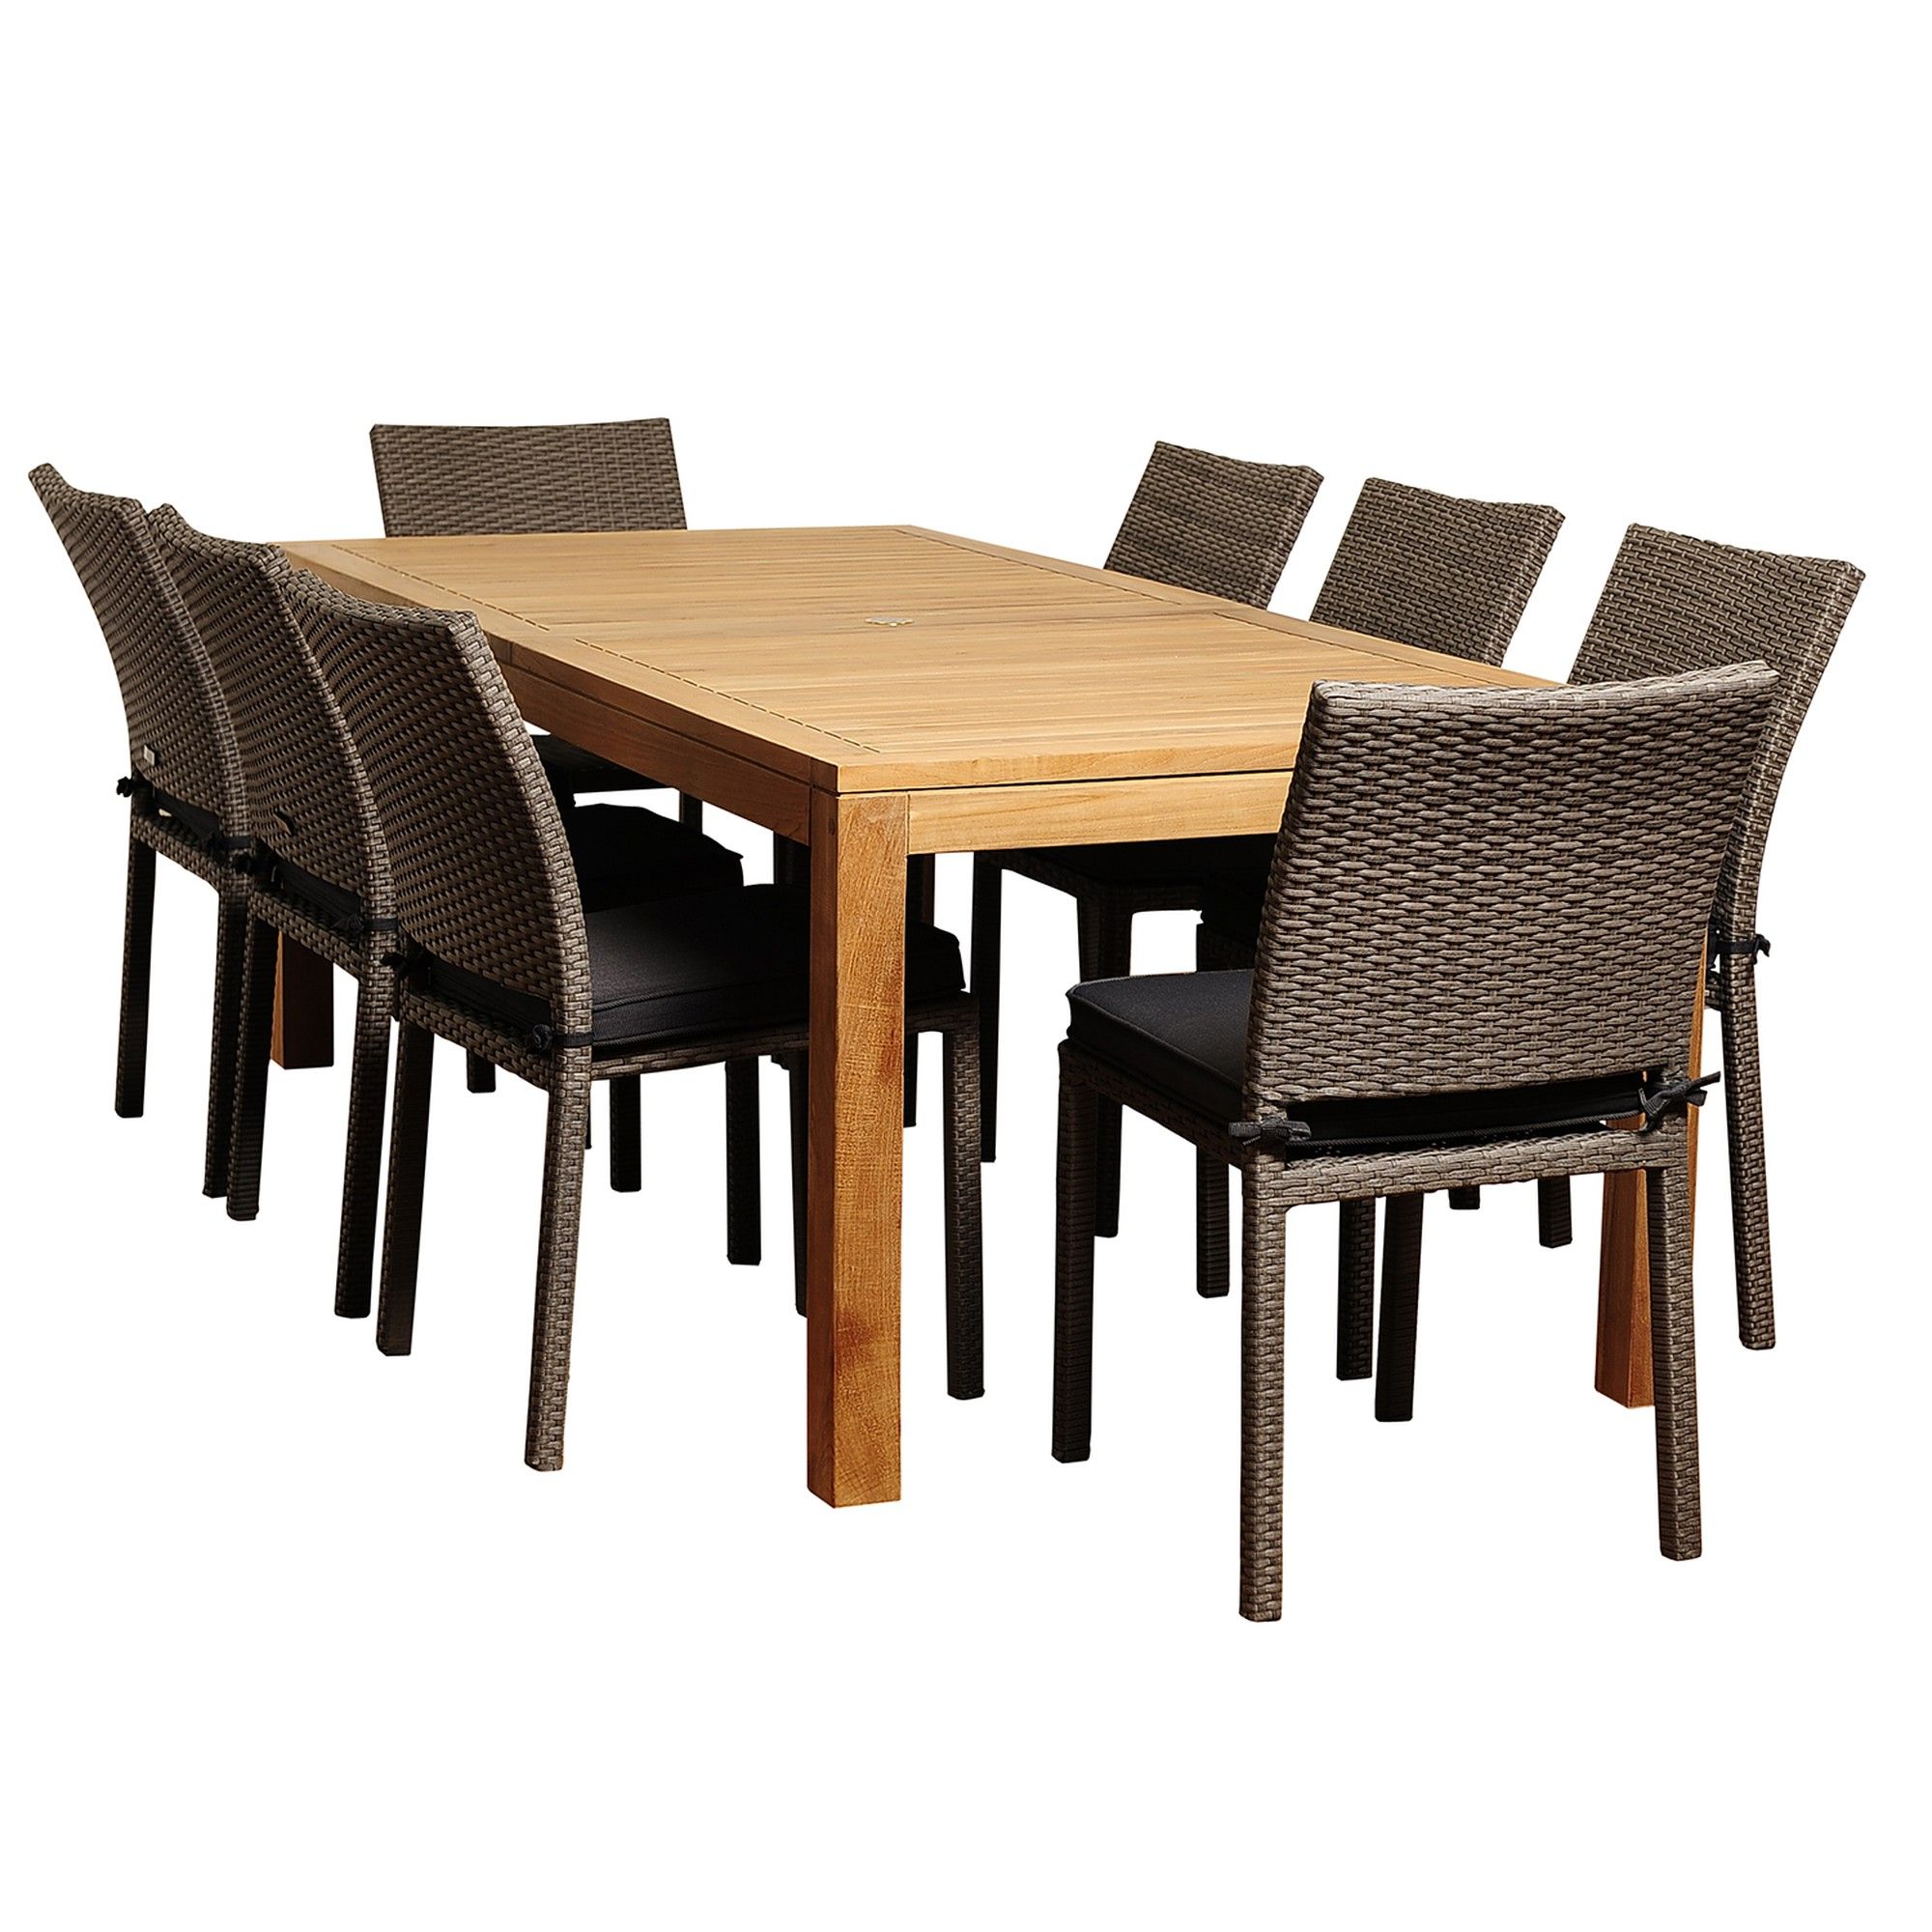 Widely Used 9 Piece Brown Damian Teak Rectangular Outdoor Patio Furniture Dining With Brown 9 Piece Outdoor Dining Sets (View 11 of 15)